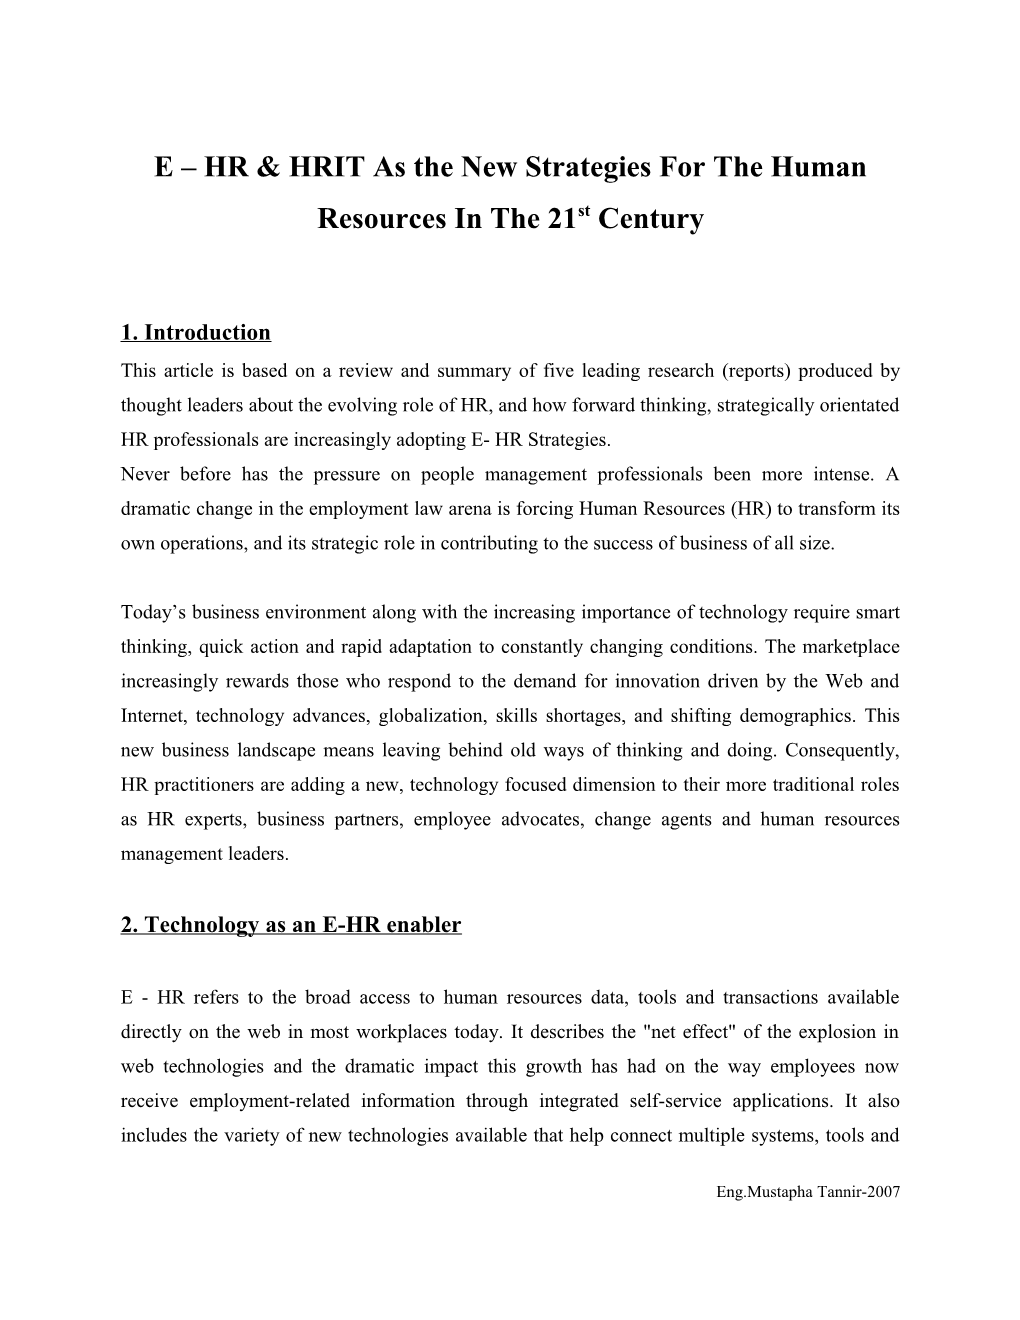 E - HR Strategy: An Electronic (E) Human Resource (HR) Strategy Is Attainable By Small And Medium Sized Business